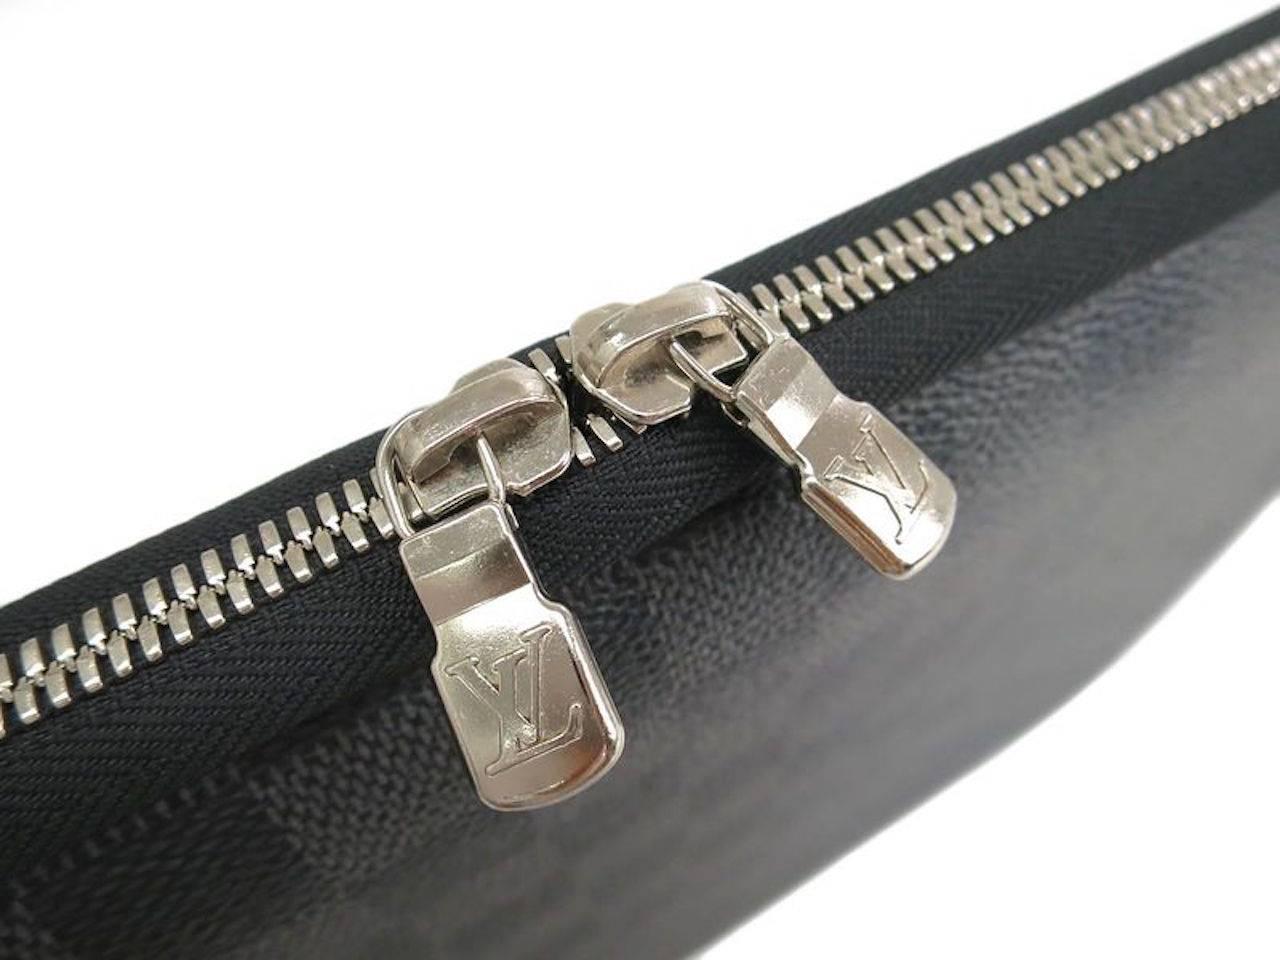 CURATOR'S NOTES

Damier canvas
Silver hardware
Zipper closure
Made in France
Date code VI2099
Measures 13.8